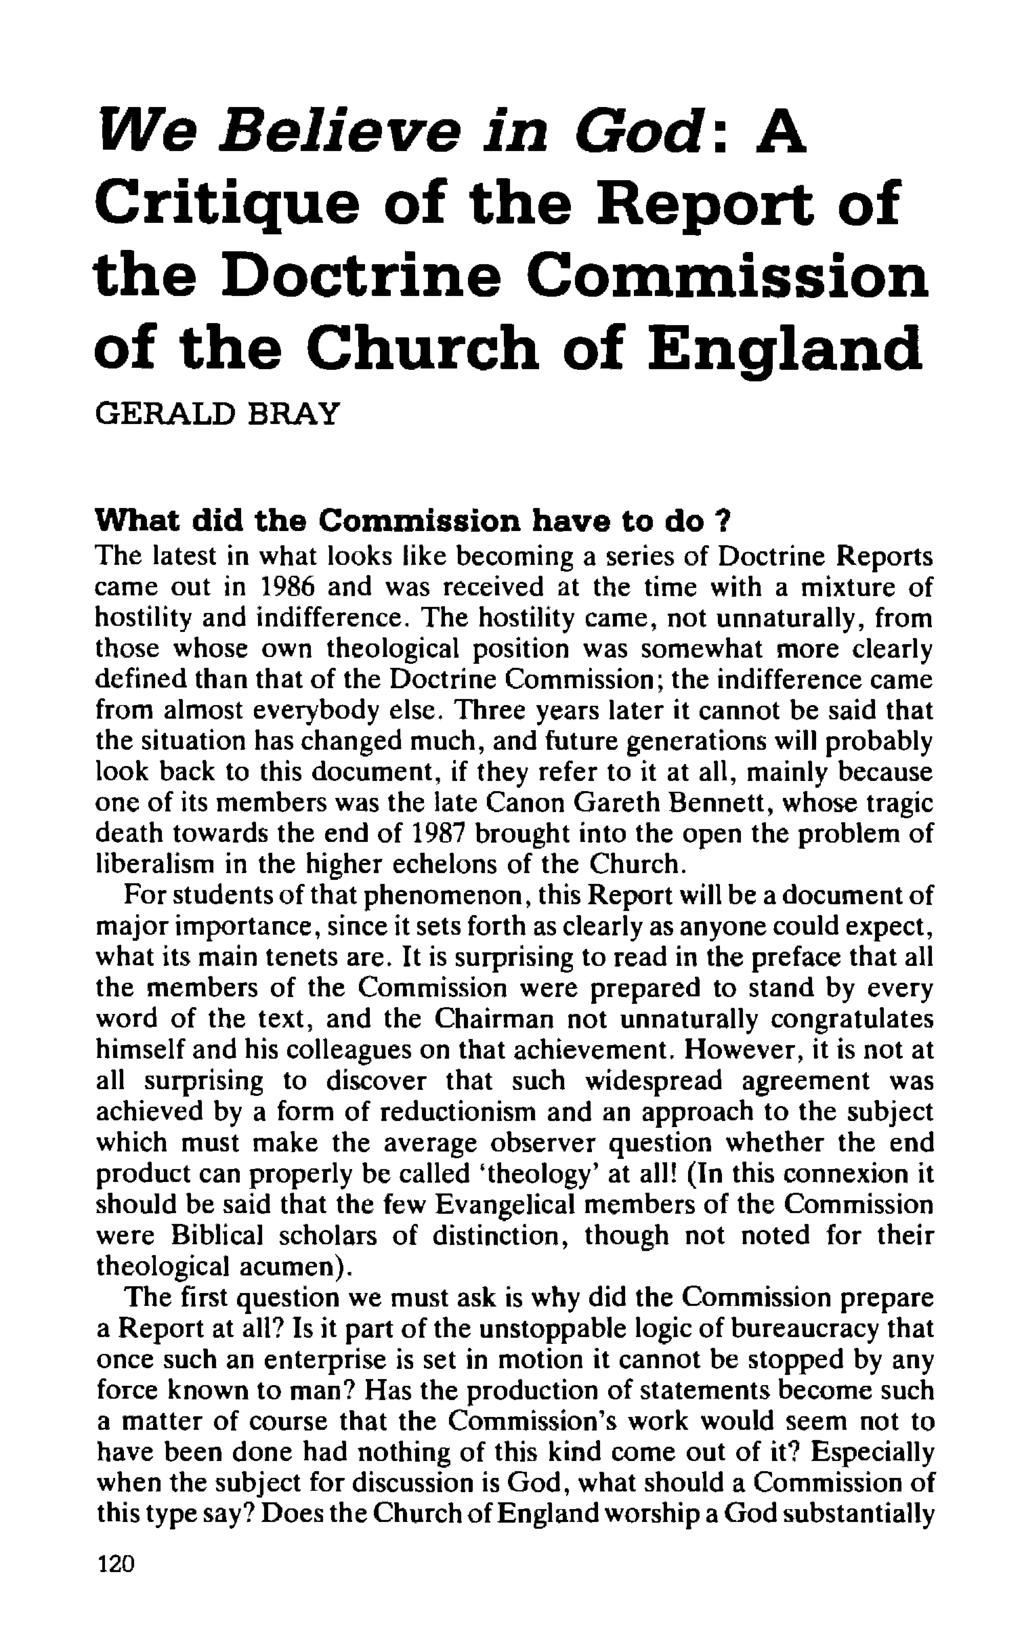 We Believe in God: A Critique of the Report of the Doctrine Commission of the Church of England GERALD BRAY What did the Commission have to do?